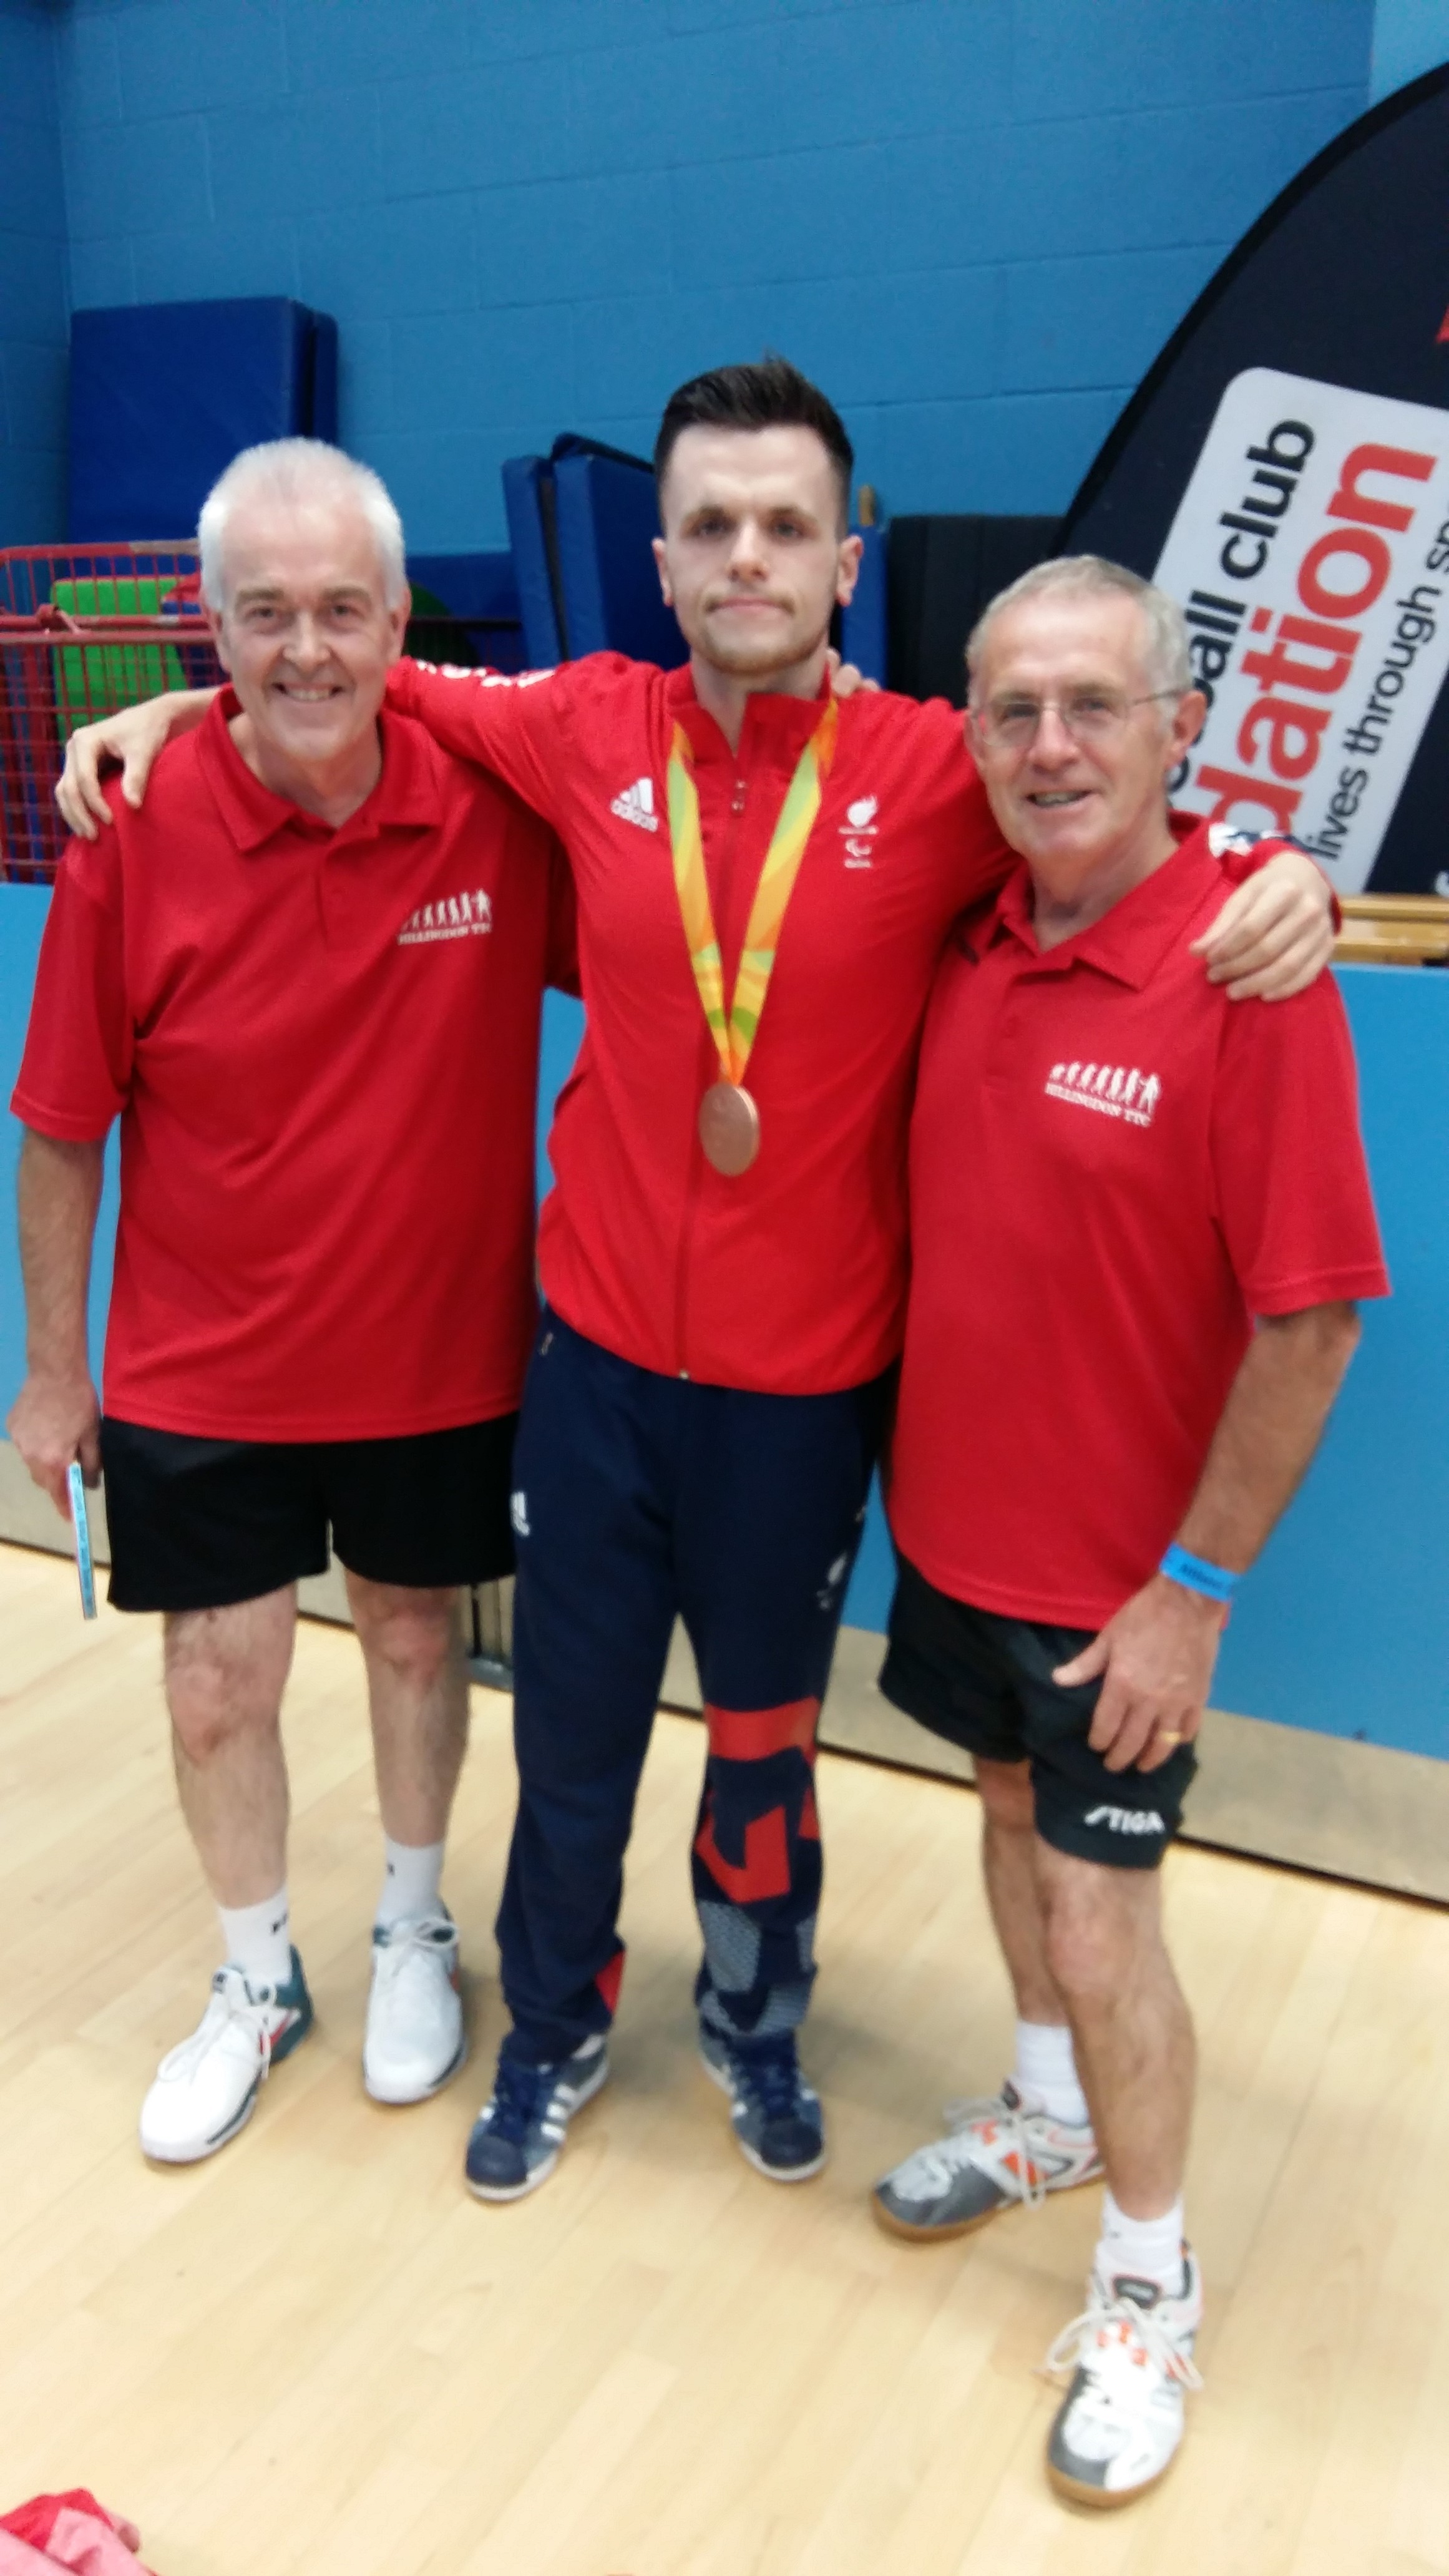 Ron and George with Aaron McKibbin - A member of the British team that won the bronze medal